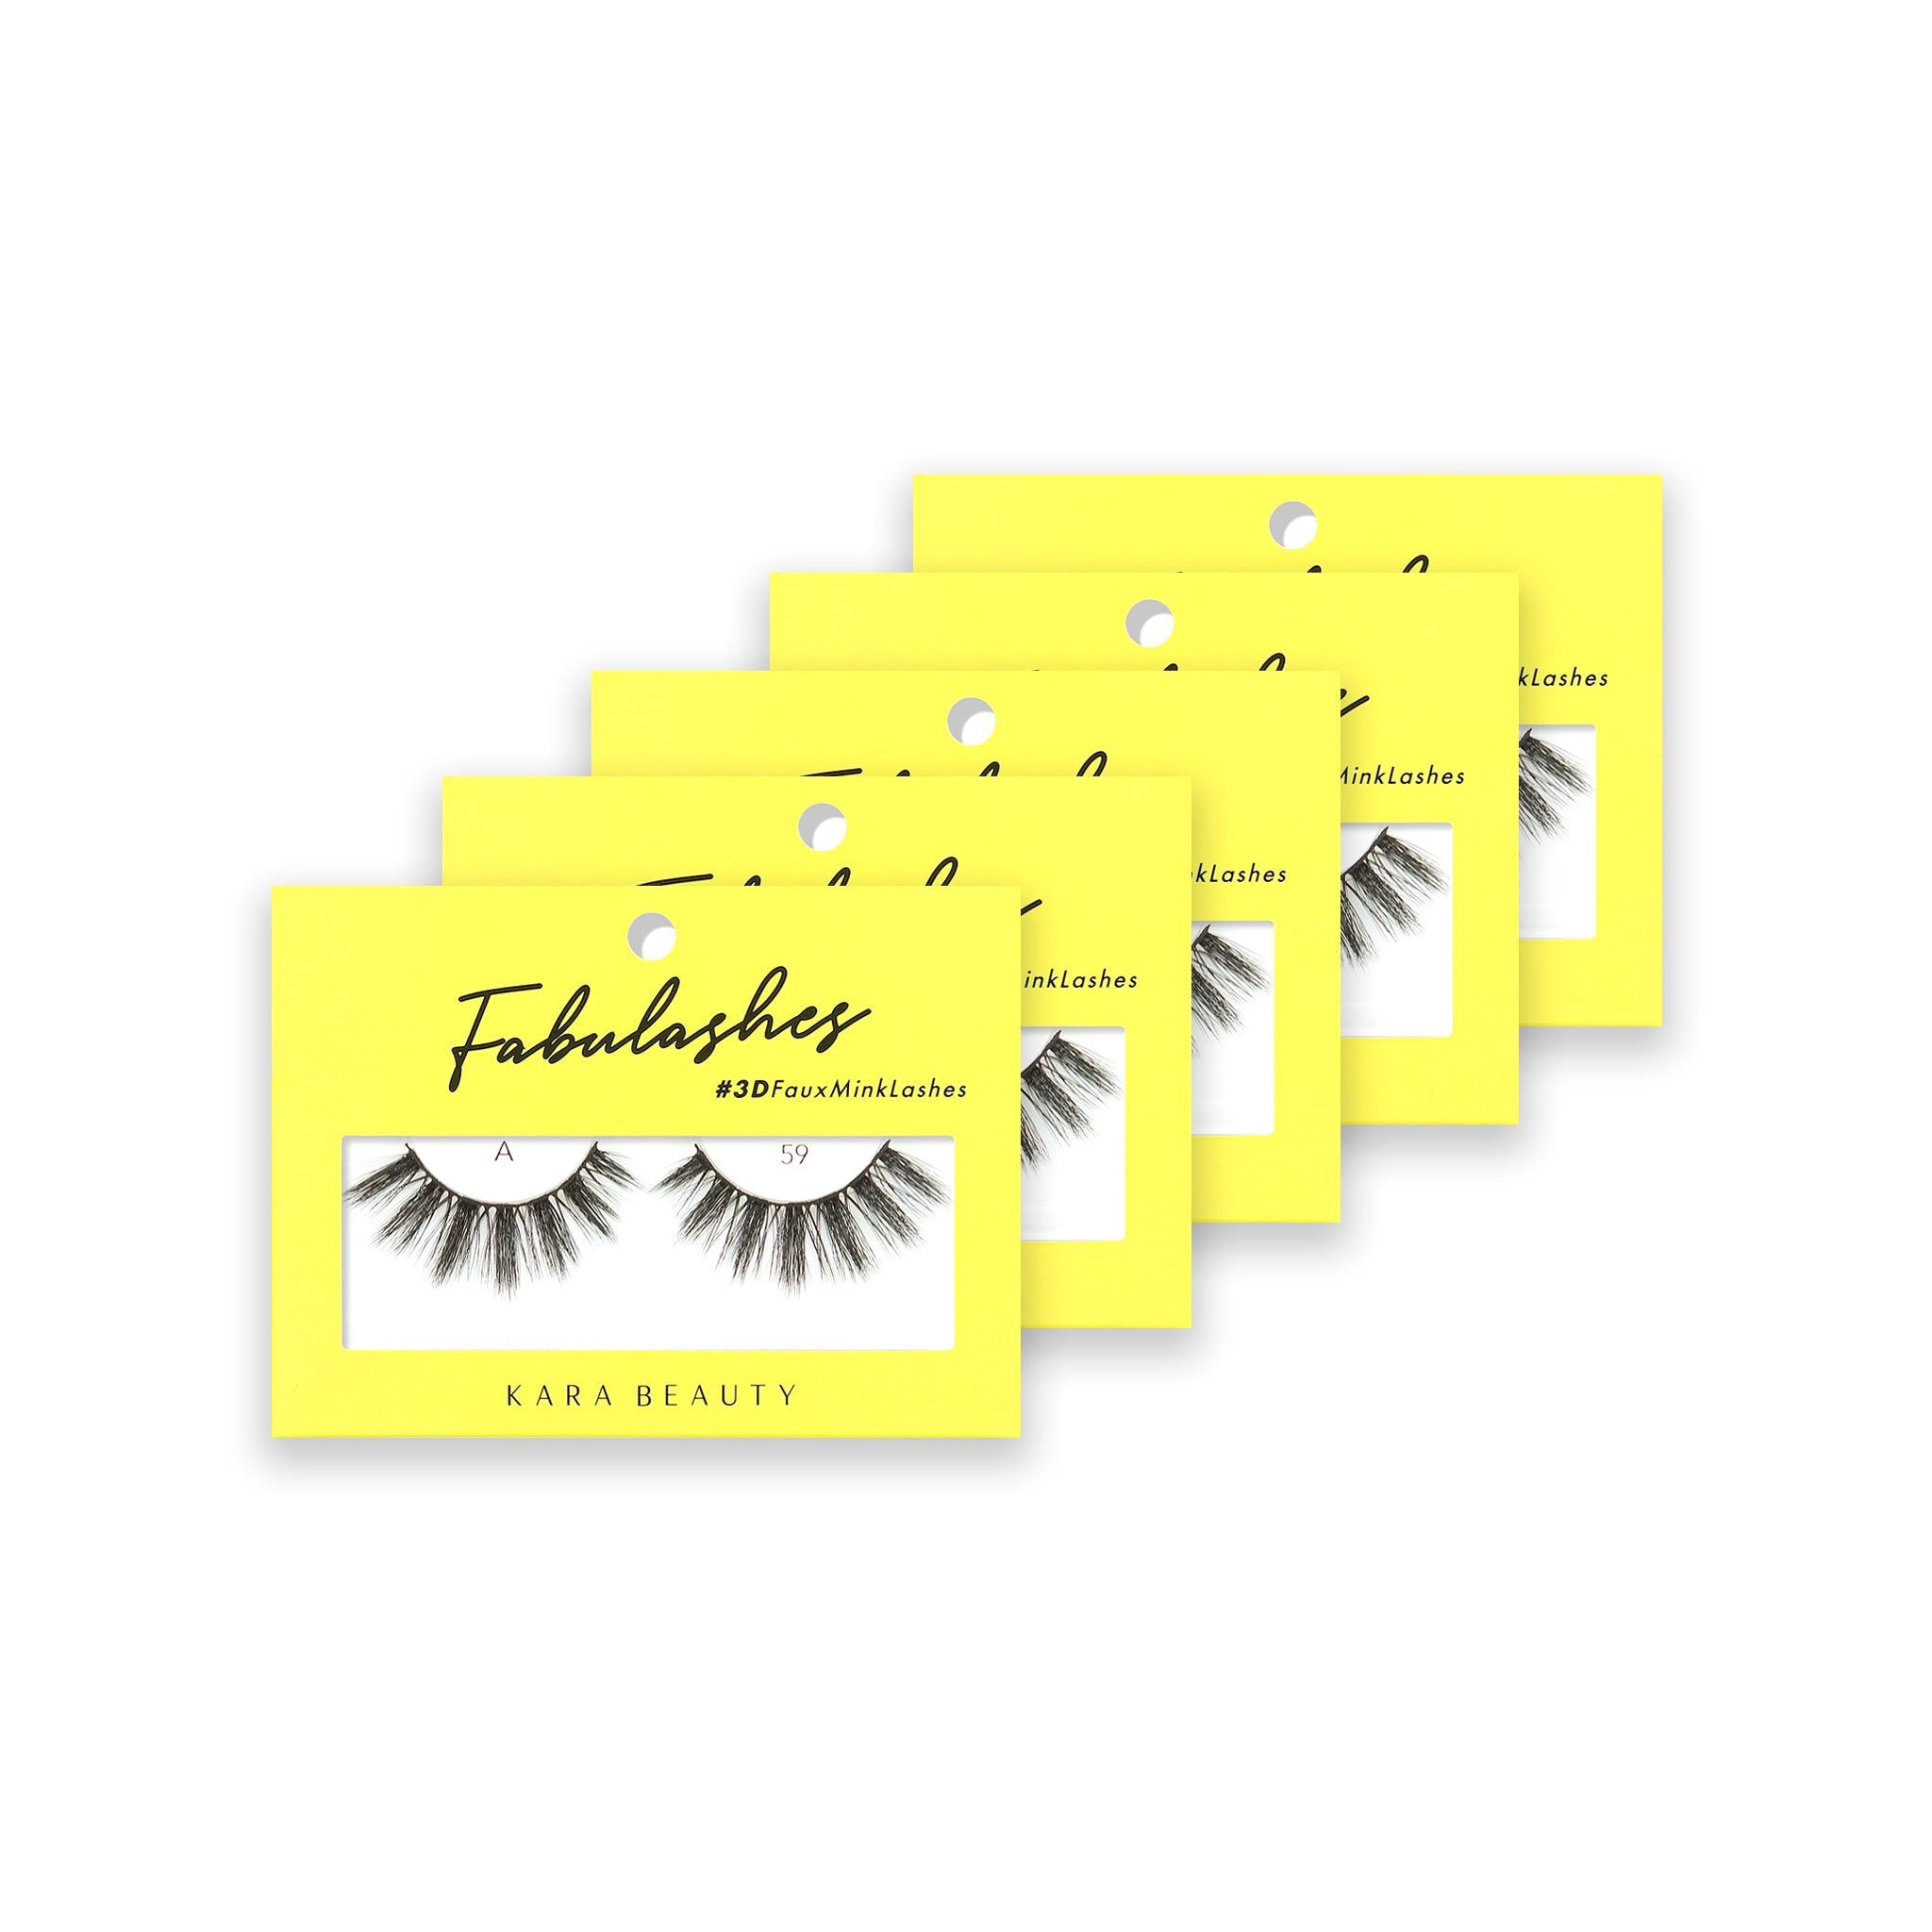 Style A59 Fabulashes 3D faux mink strip eyelashes 5 pack